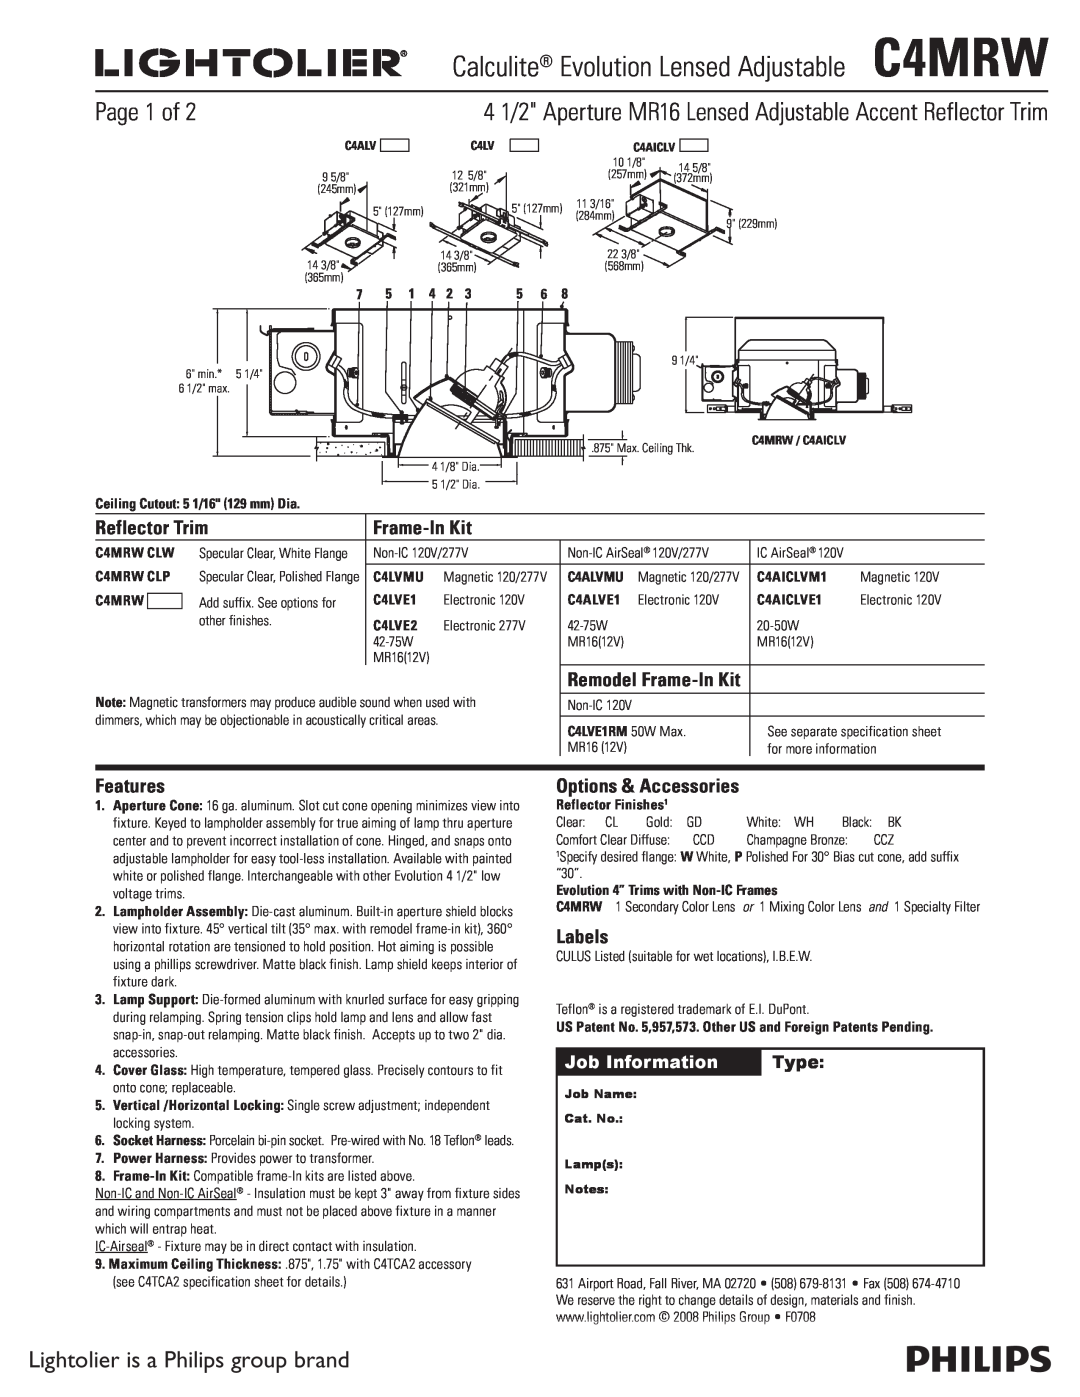 Lightolier C4MRW specifications Page 1 of, Lightolier is a Philips group brand, Job Information, Type, Reflector Trim 